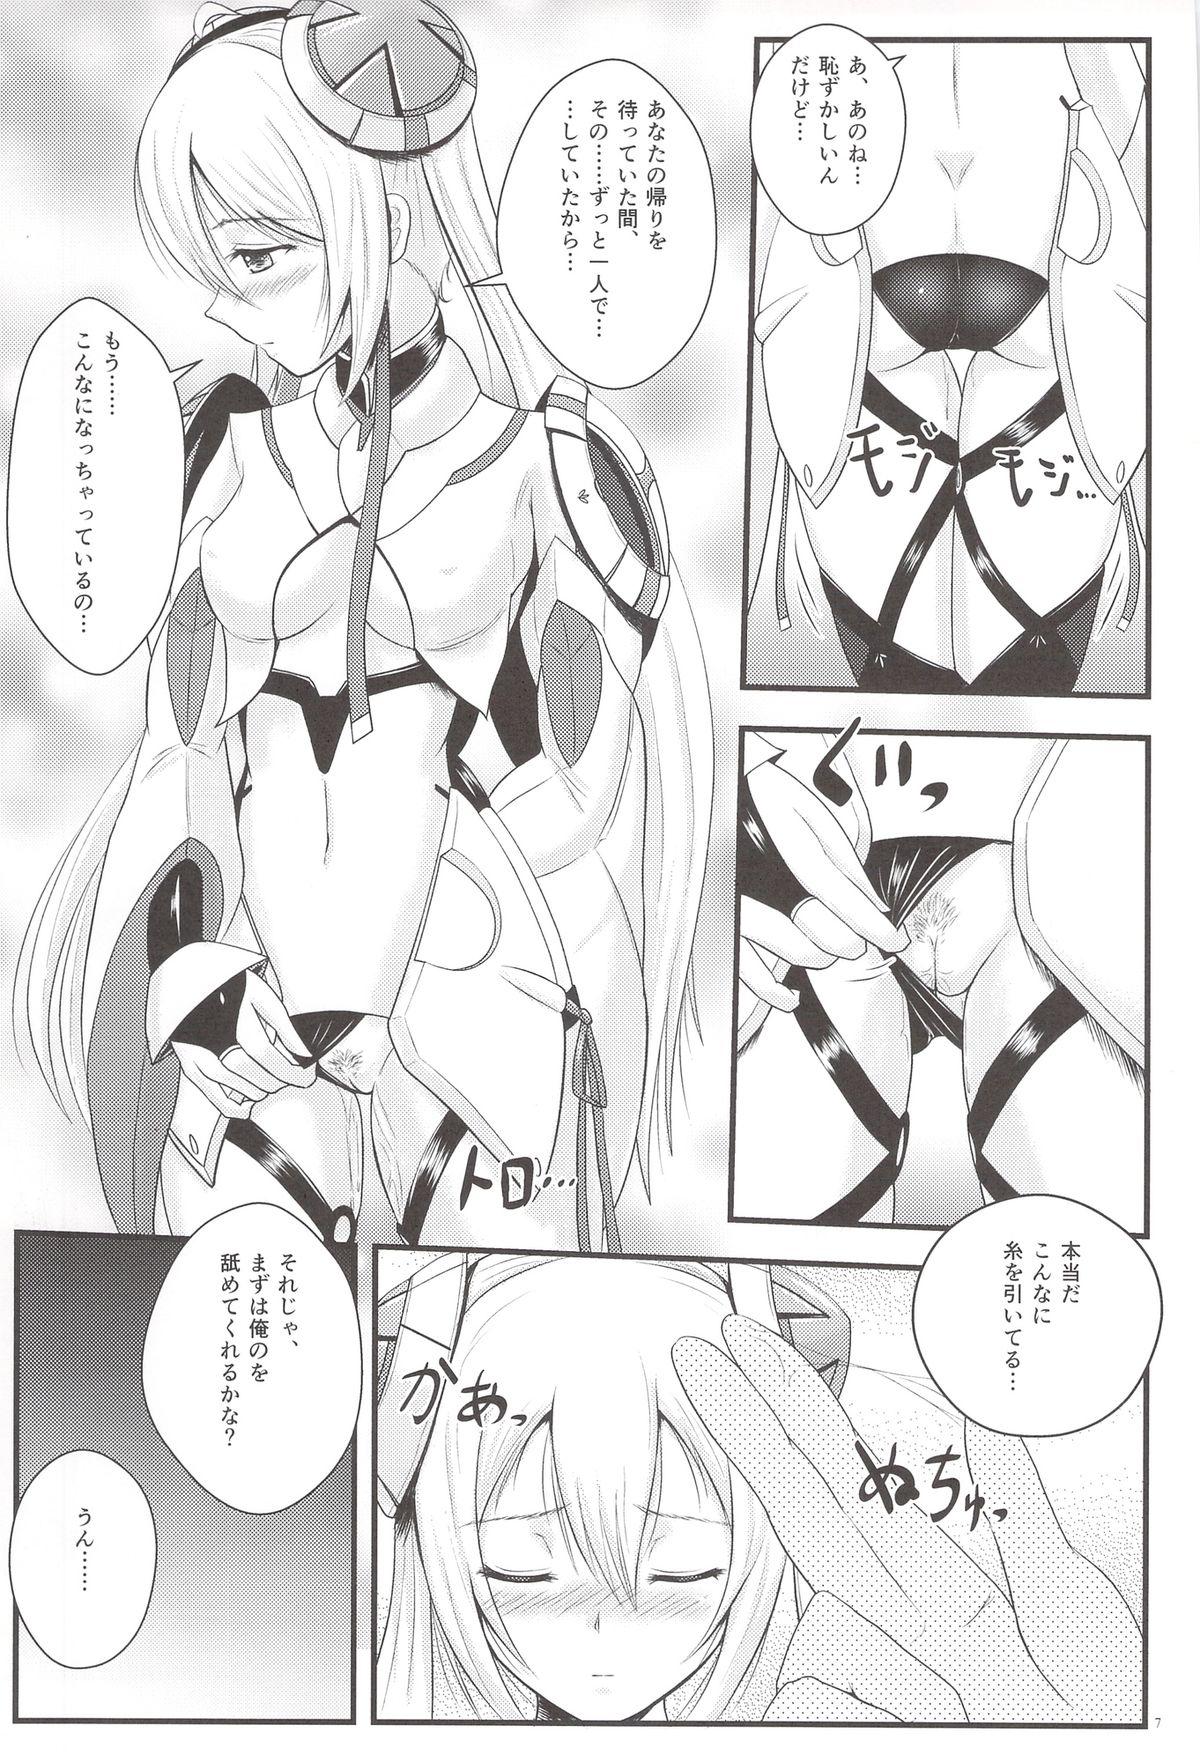 Footjob When I think of you - Phantasy star online 2 New - Page 6